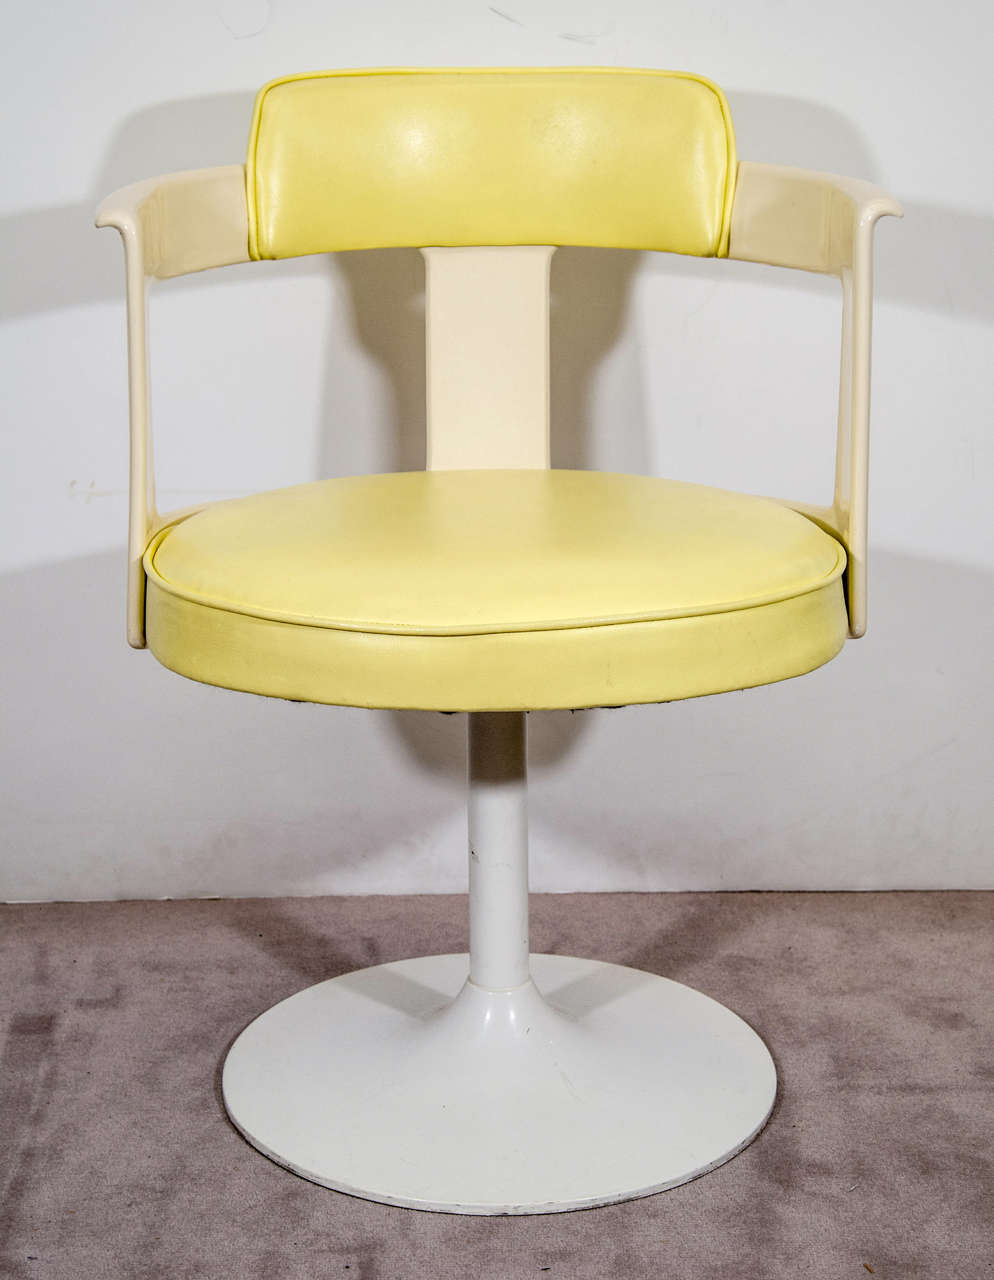 A pair of tulip chairs by Daystrom Furniture, produced circa 1960s-1970s, following the style of Eero Saarinen, with yellow vinyl seats against white arms and pedestal bases. Good vintage condition, with age appropriate wear.